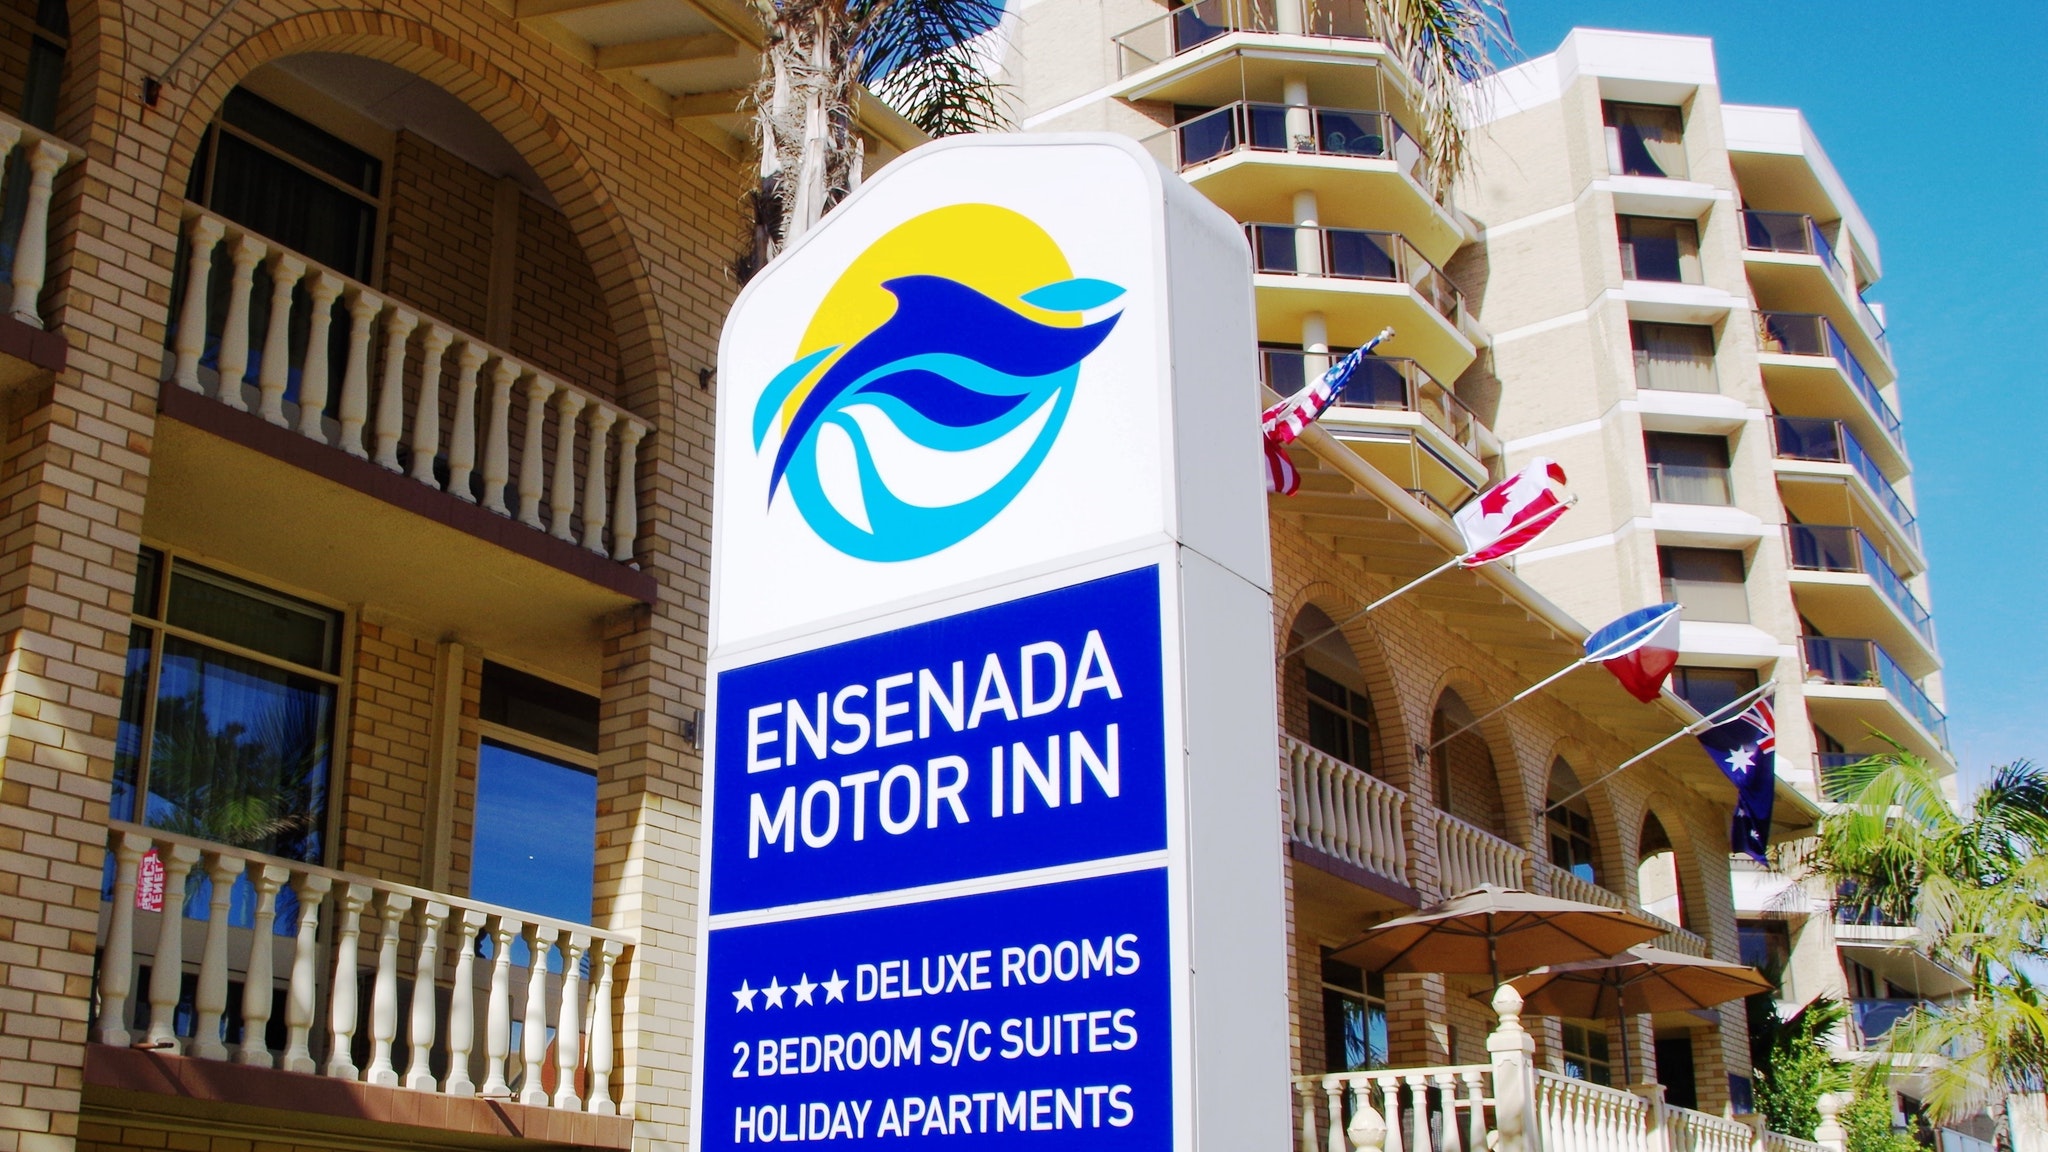 Ensenada Motor Inn And Suites - Accommodation in Surfers Paradise 11